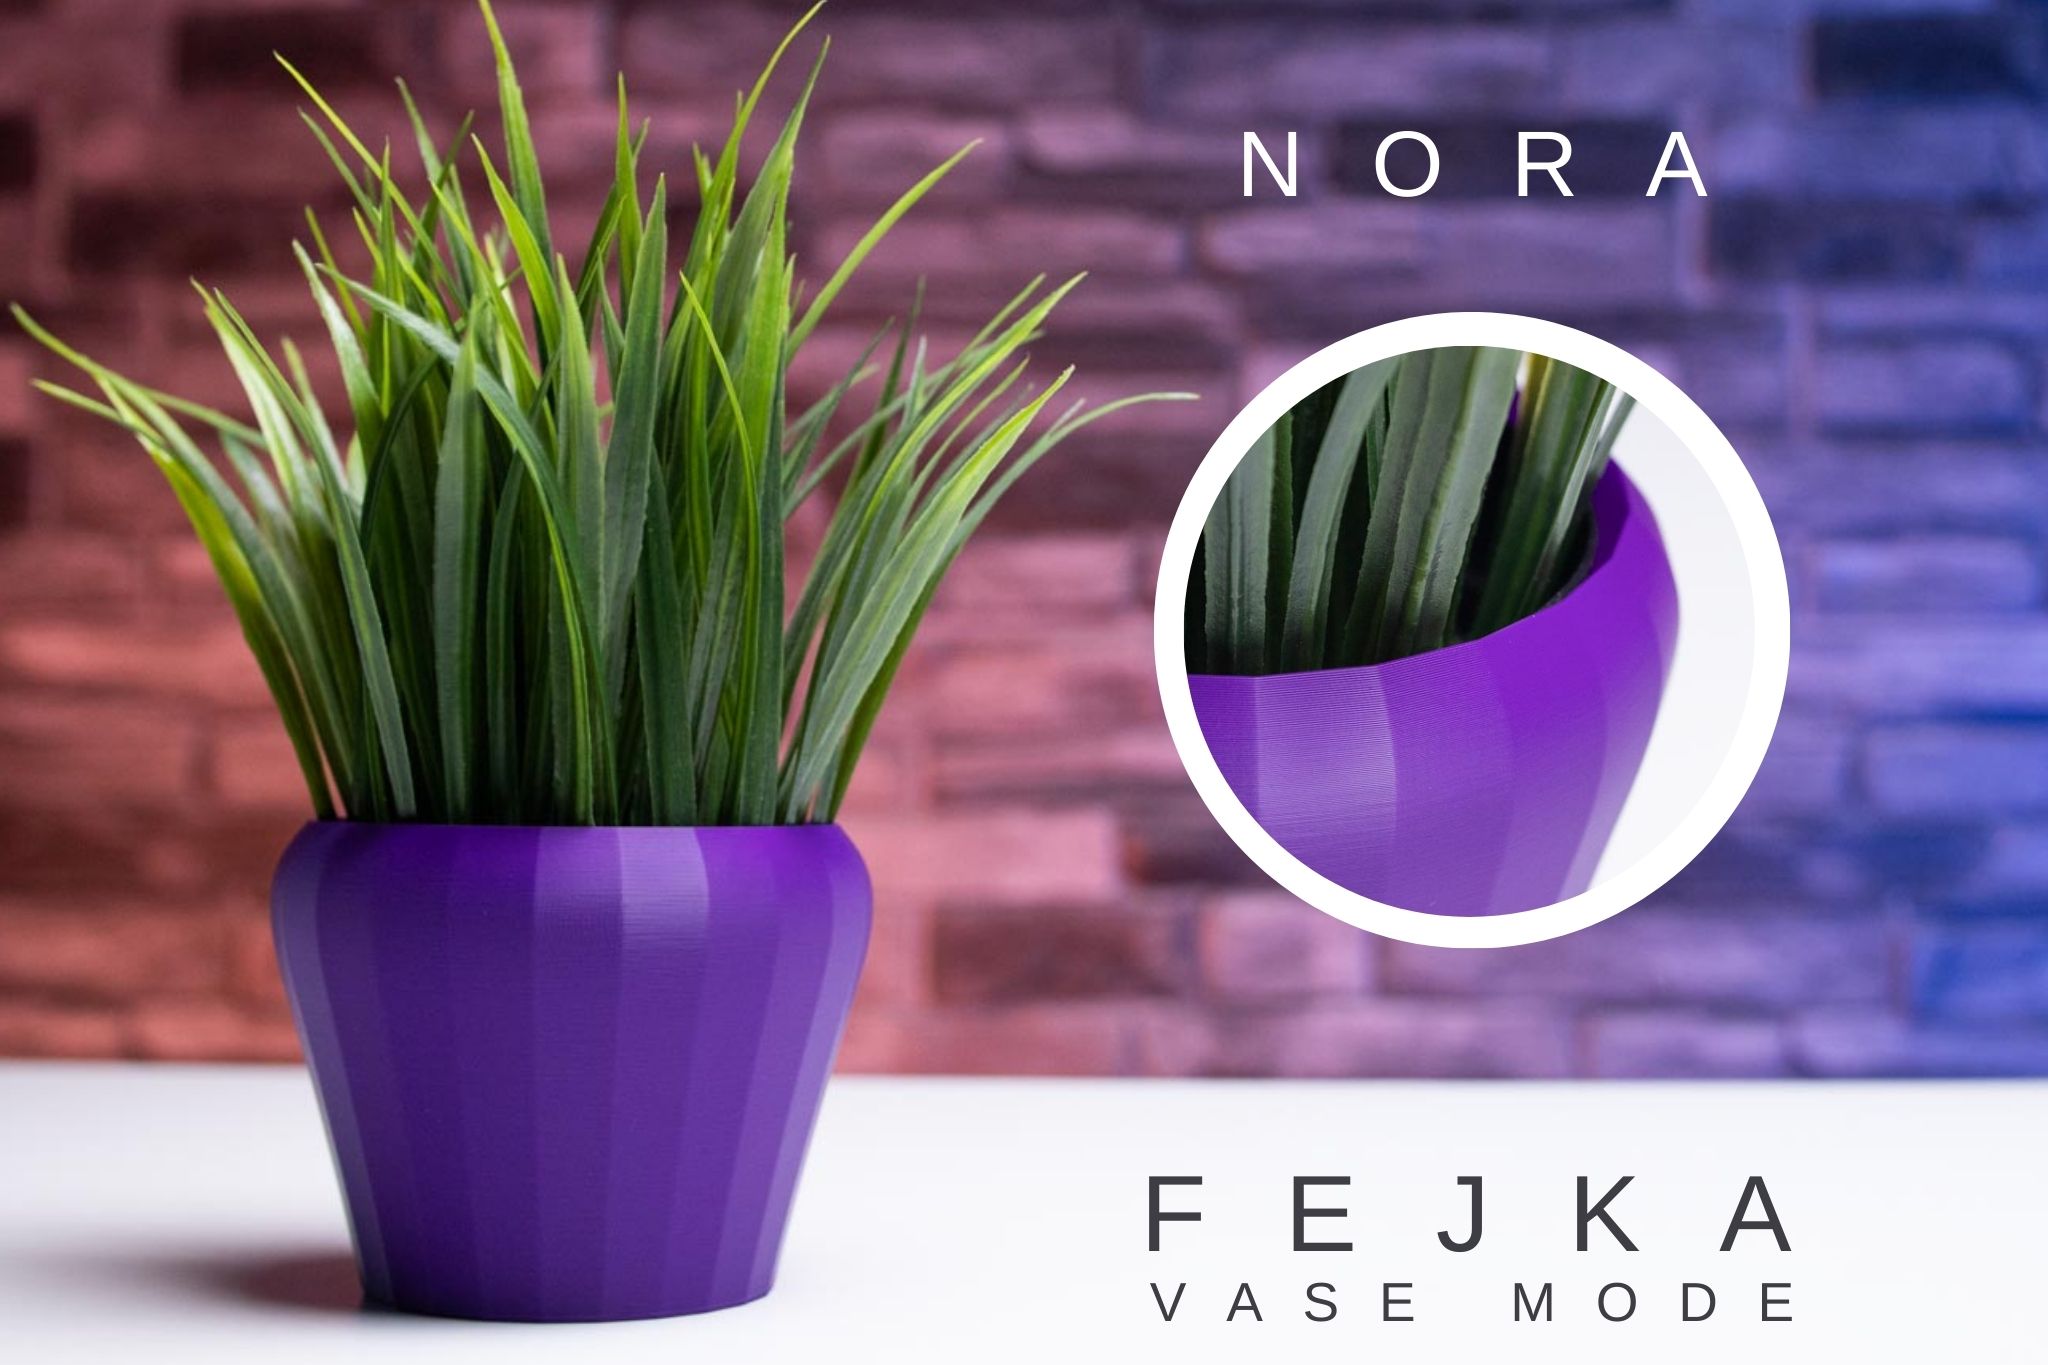 3D Printed Planter and Pot for Ikea Fejka - Vase NORA